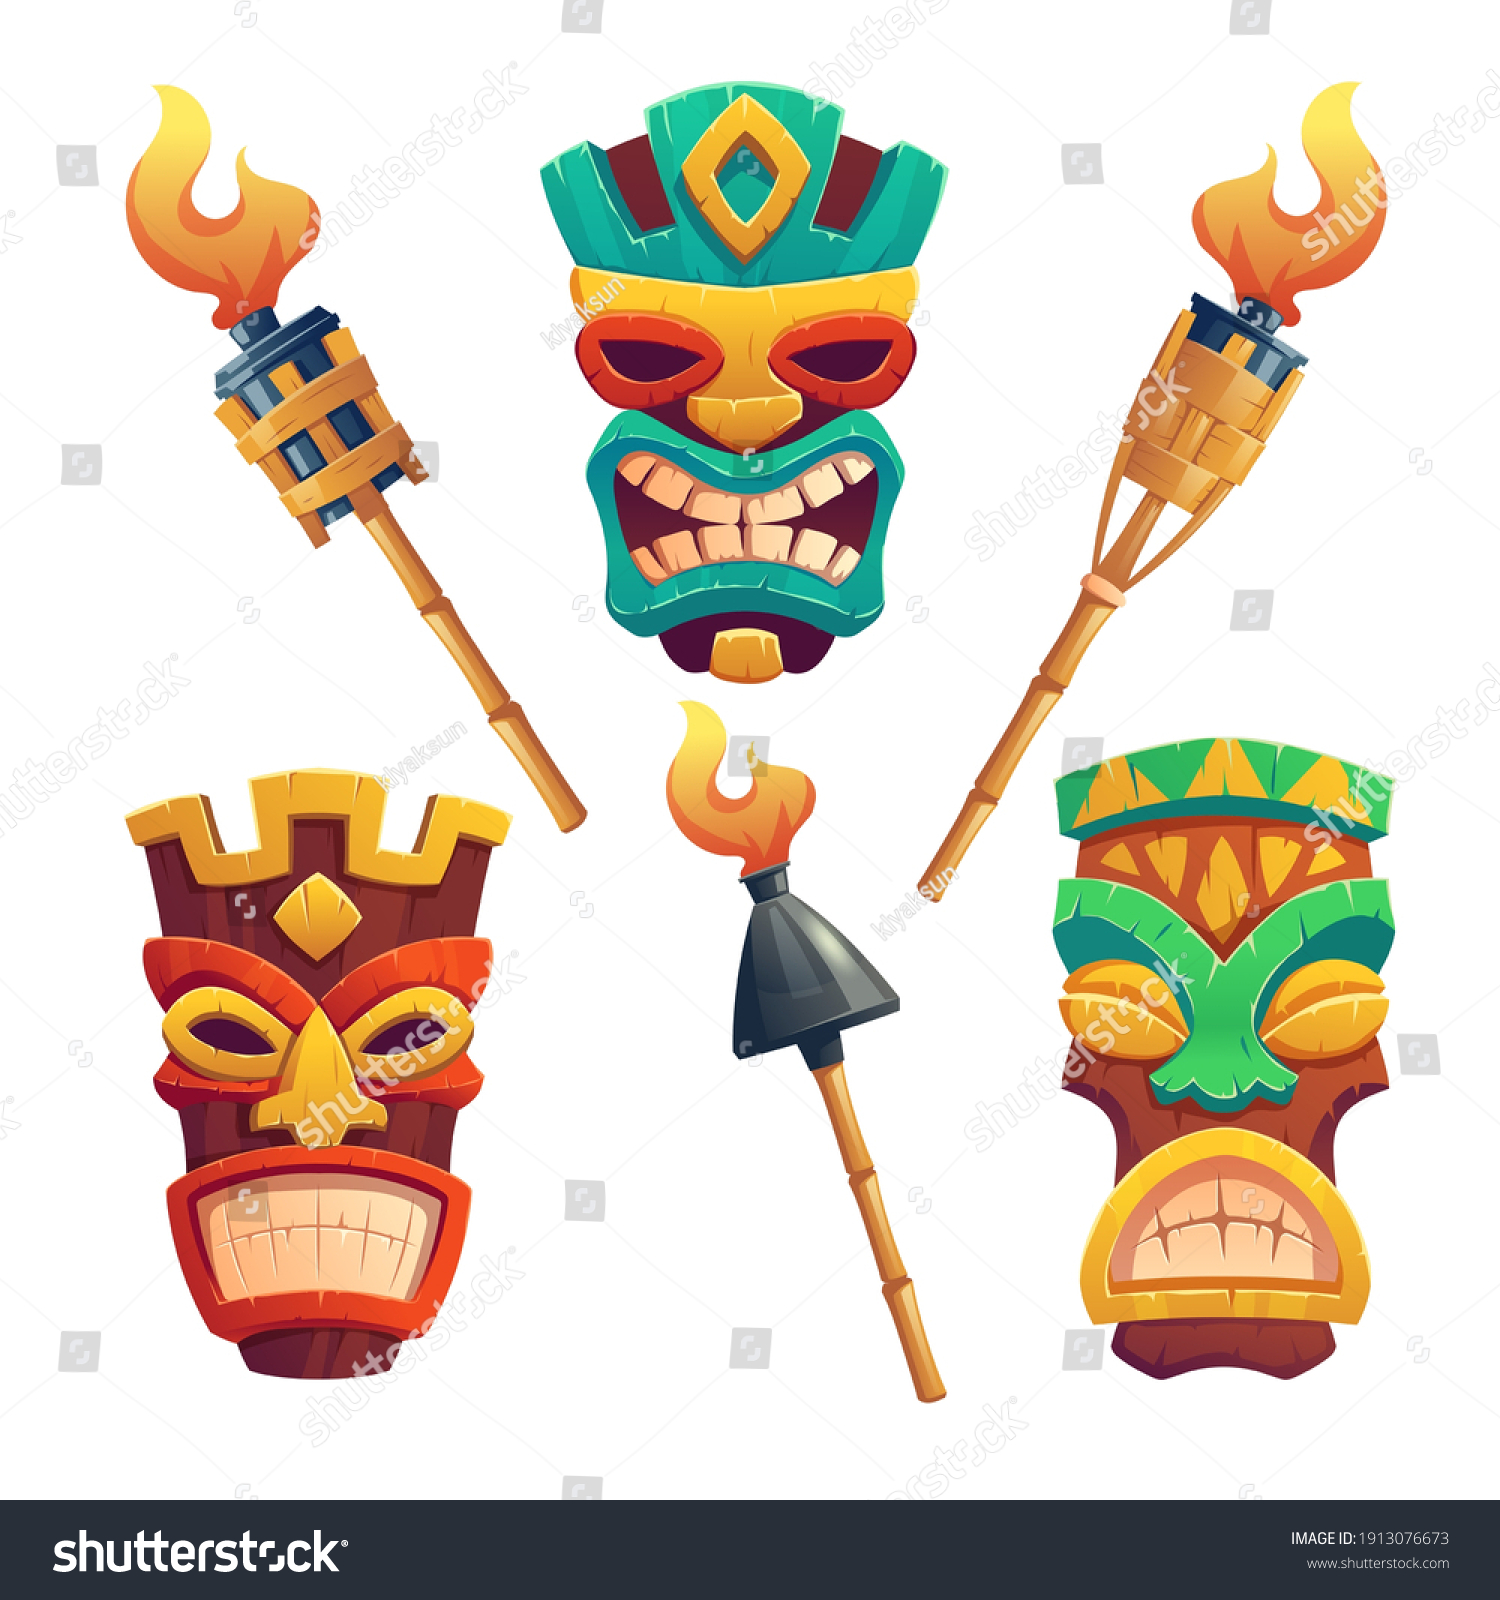 SVG of Tiki masks, hawaiian tribal totem and burning torches on bamboo stick. Vector cartoon set of polynesian traditional statues, ancient wooden god faces isolated on white background svg